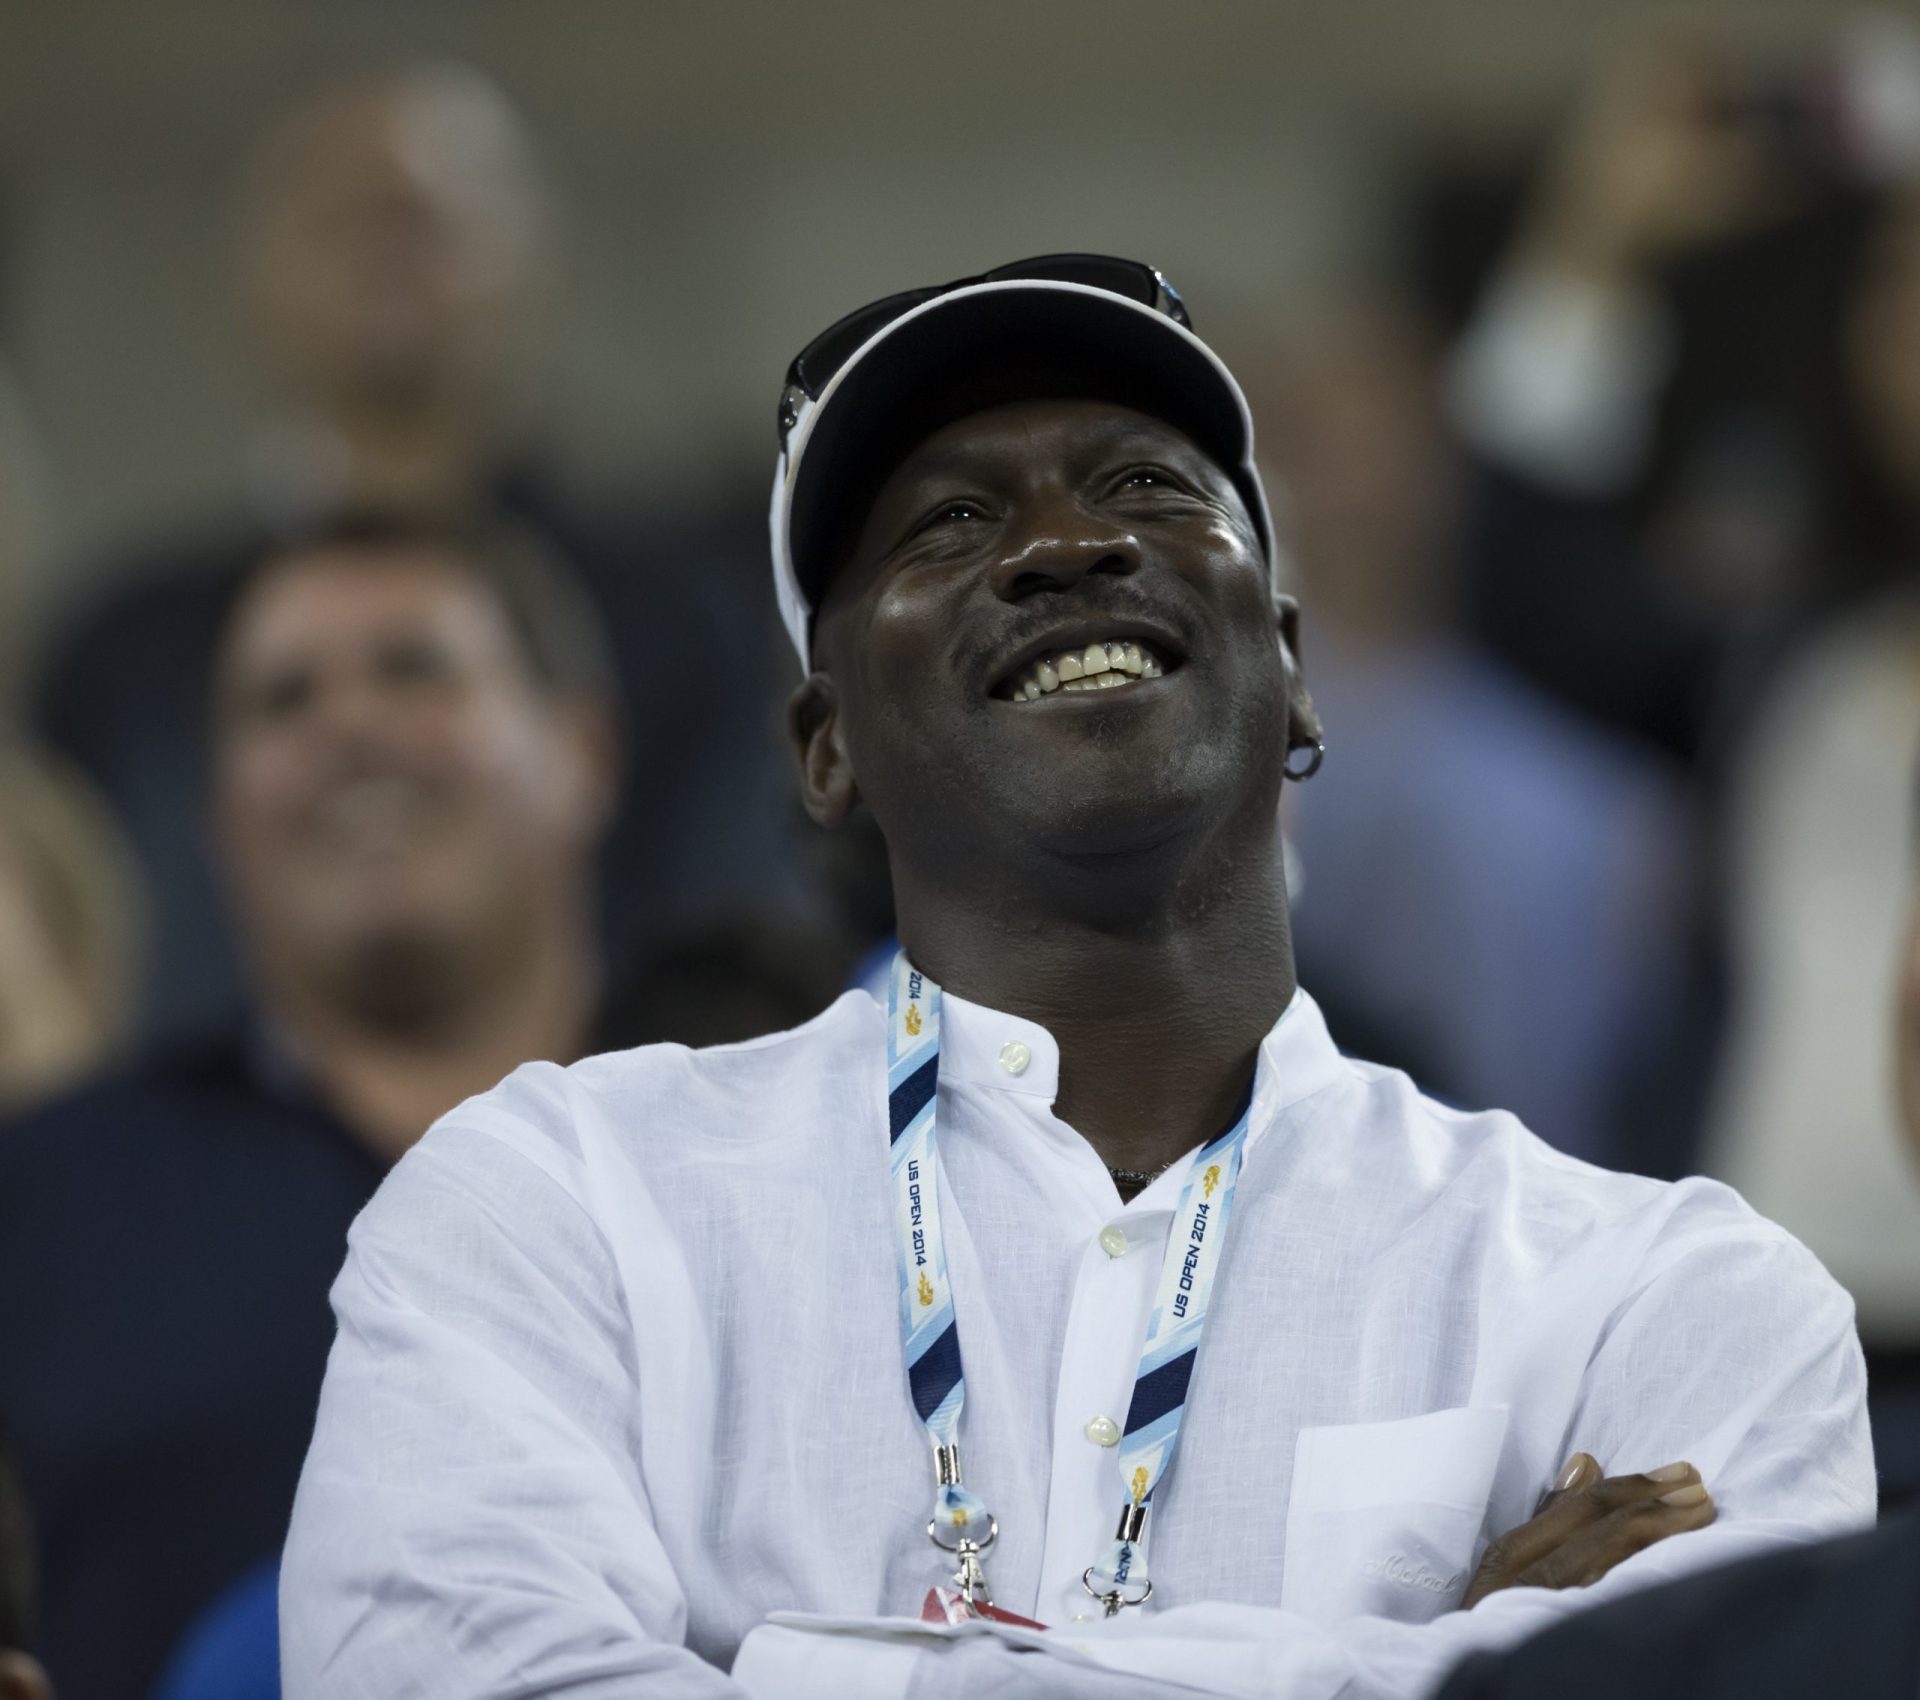 Michael Jordan's 13 years of owning an NBA franchise is coming to an end